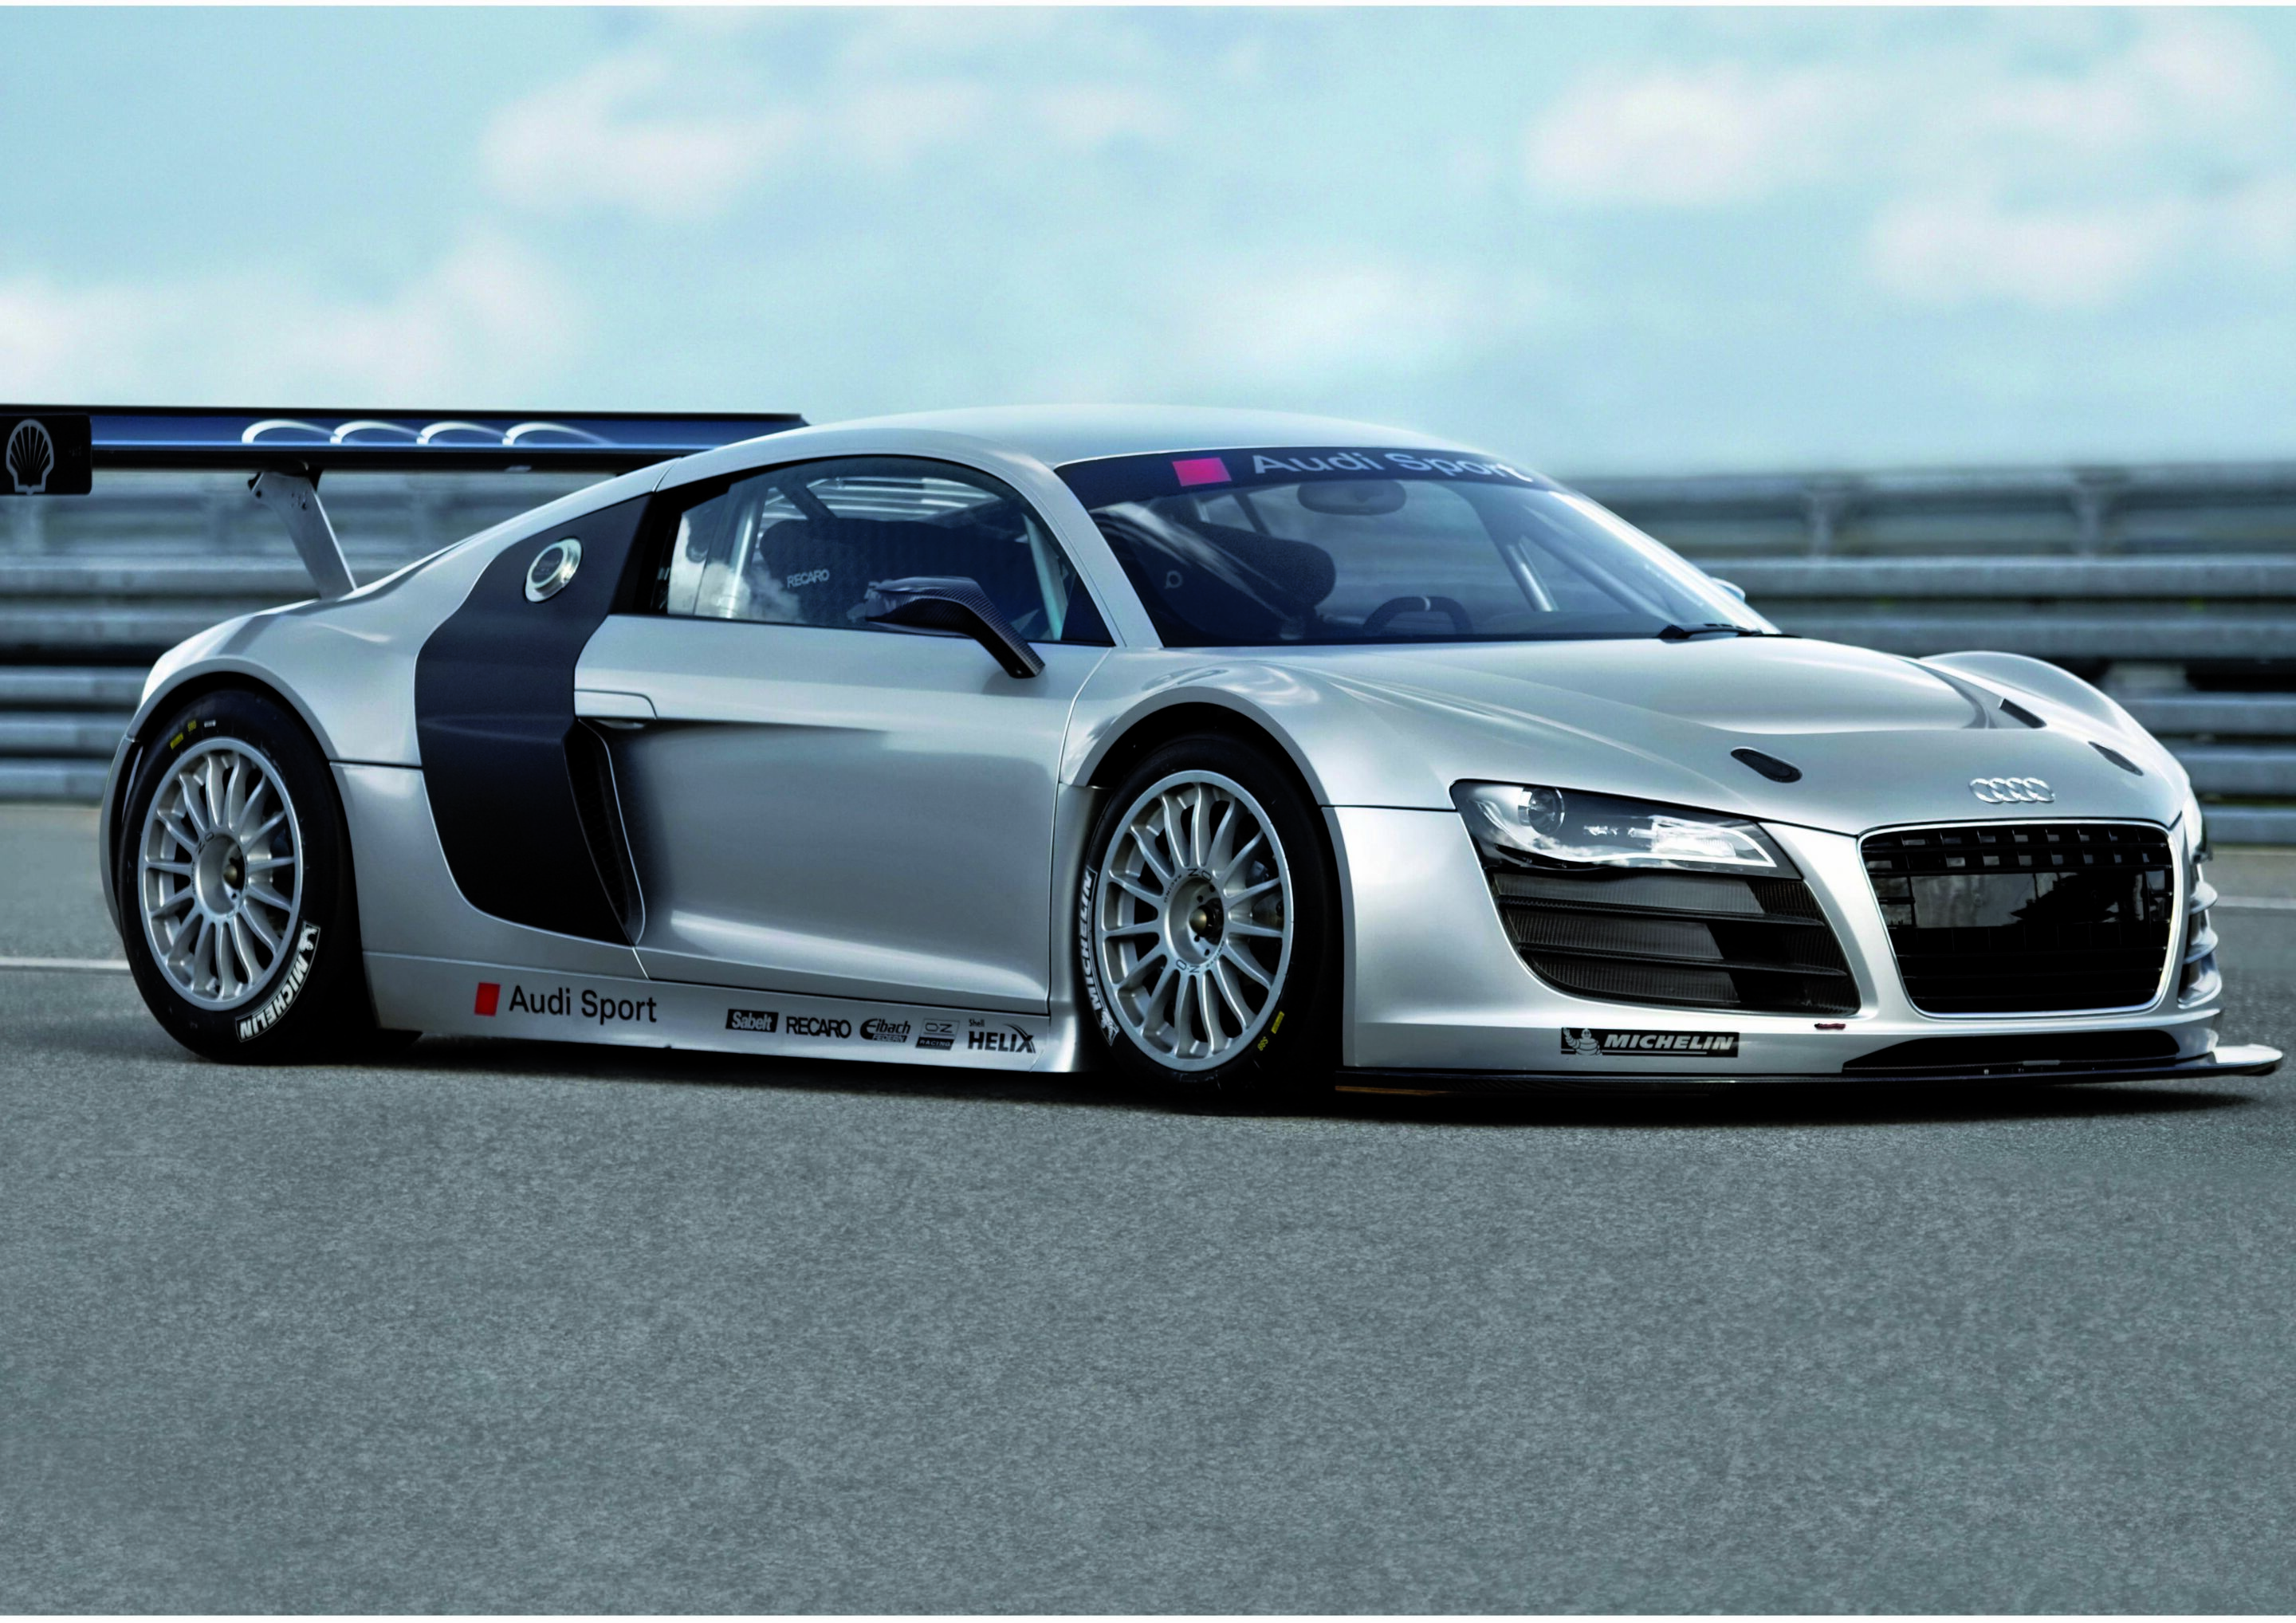 GT3 version of the Audi R8